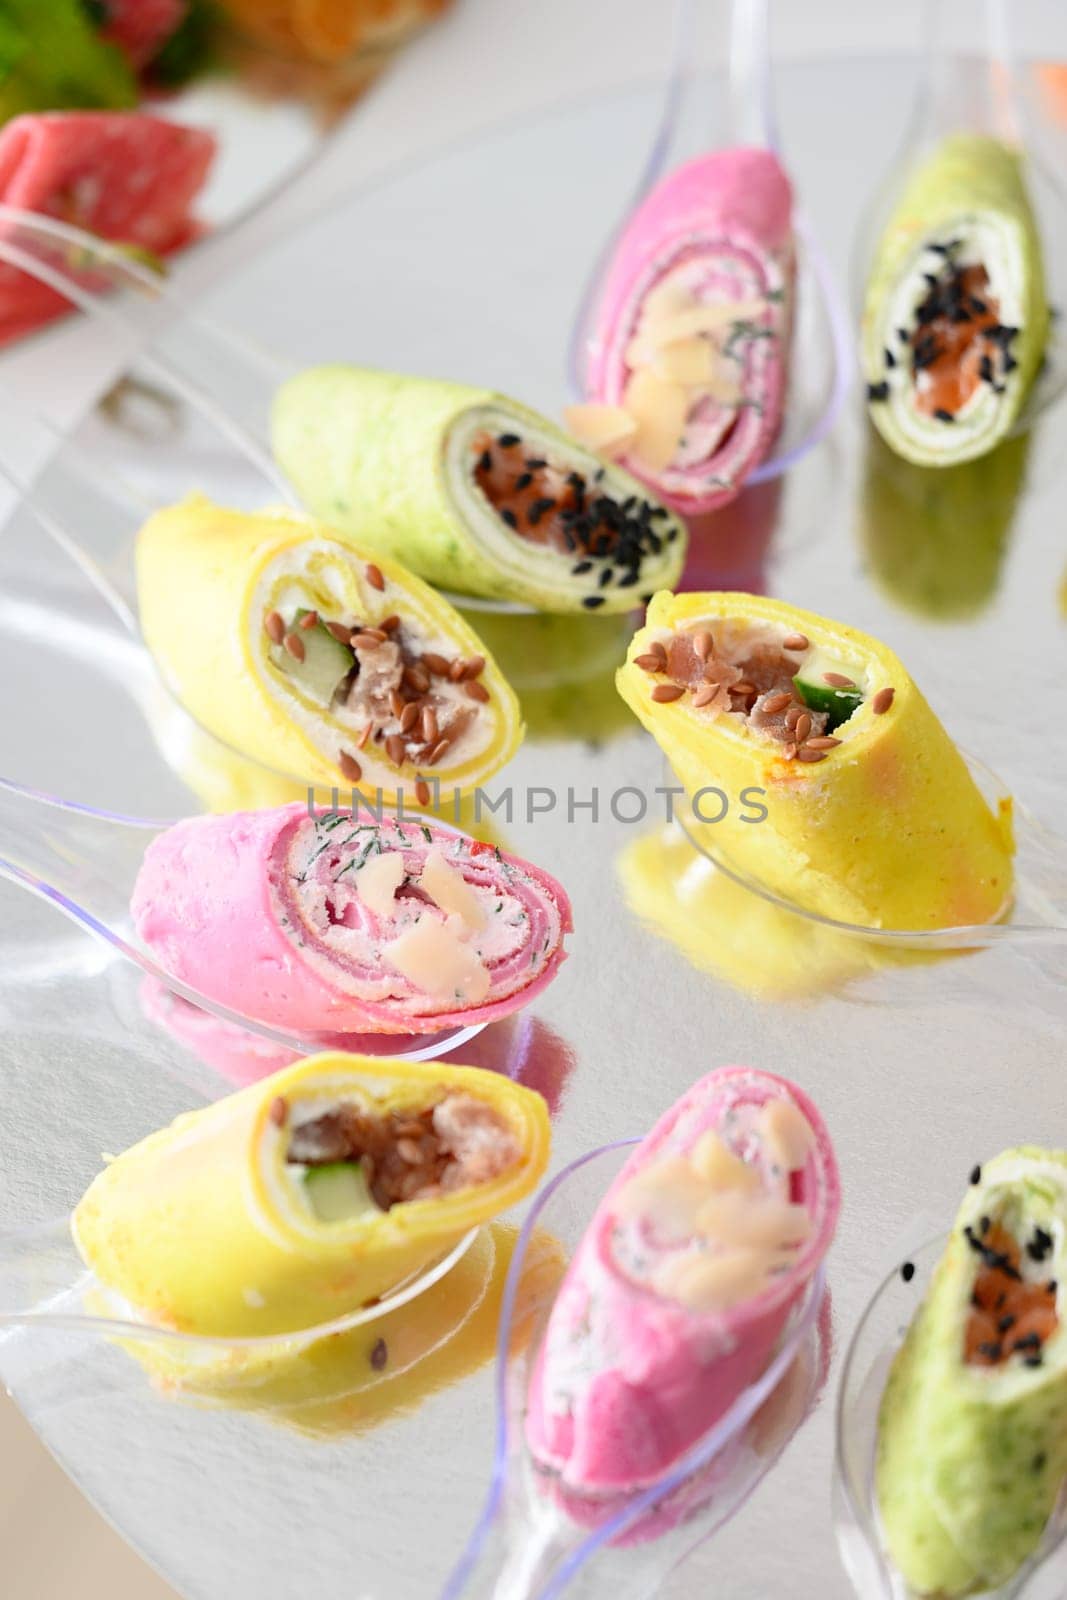 Cheese appetizer in rolls on small disposable spoons, roll in purple and yellow colors.